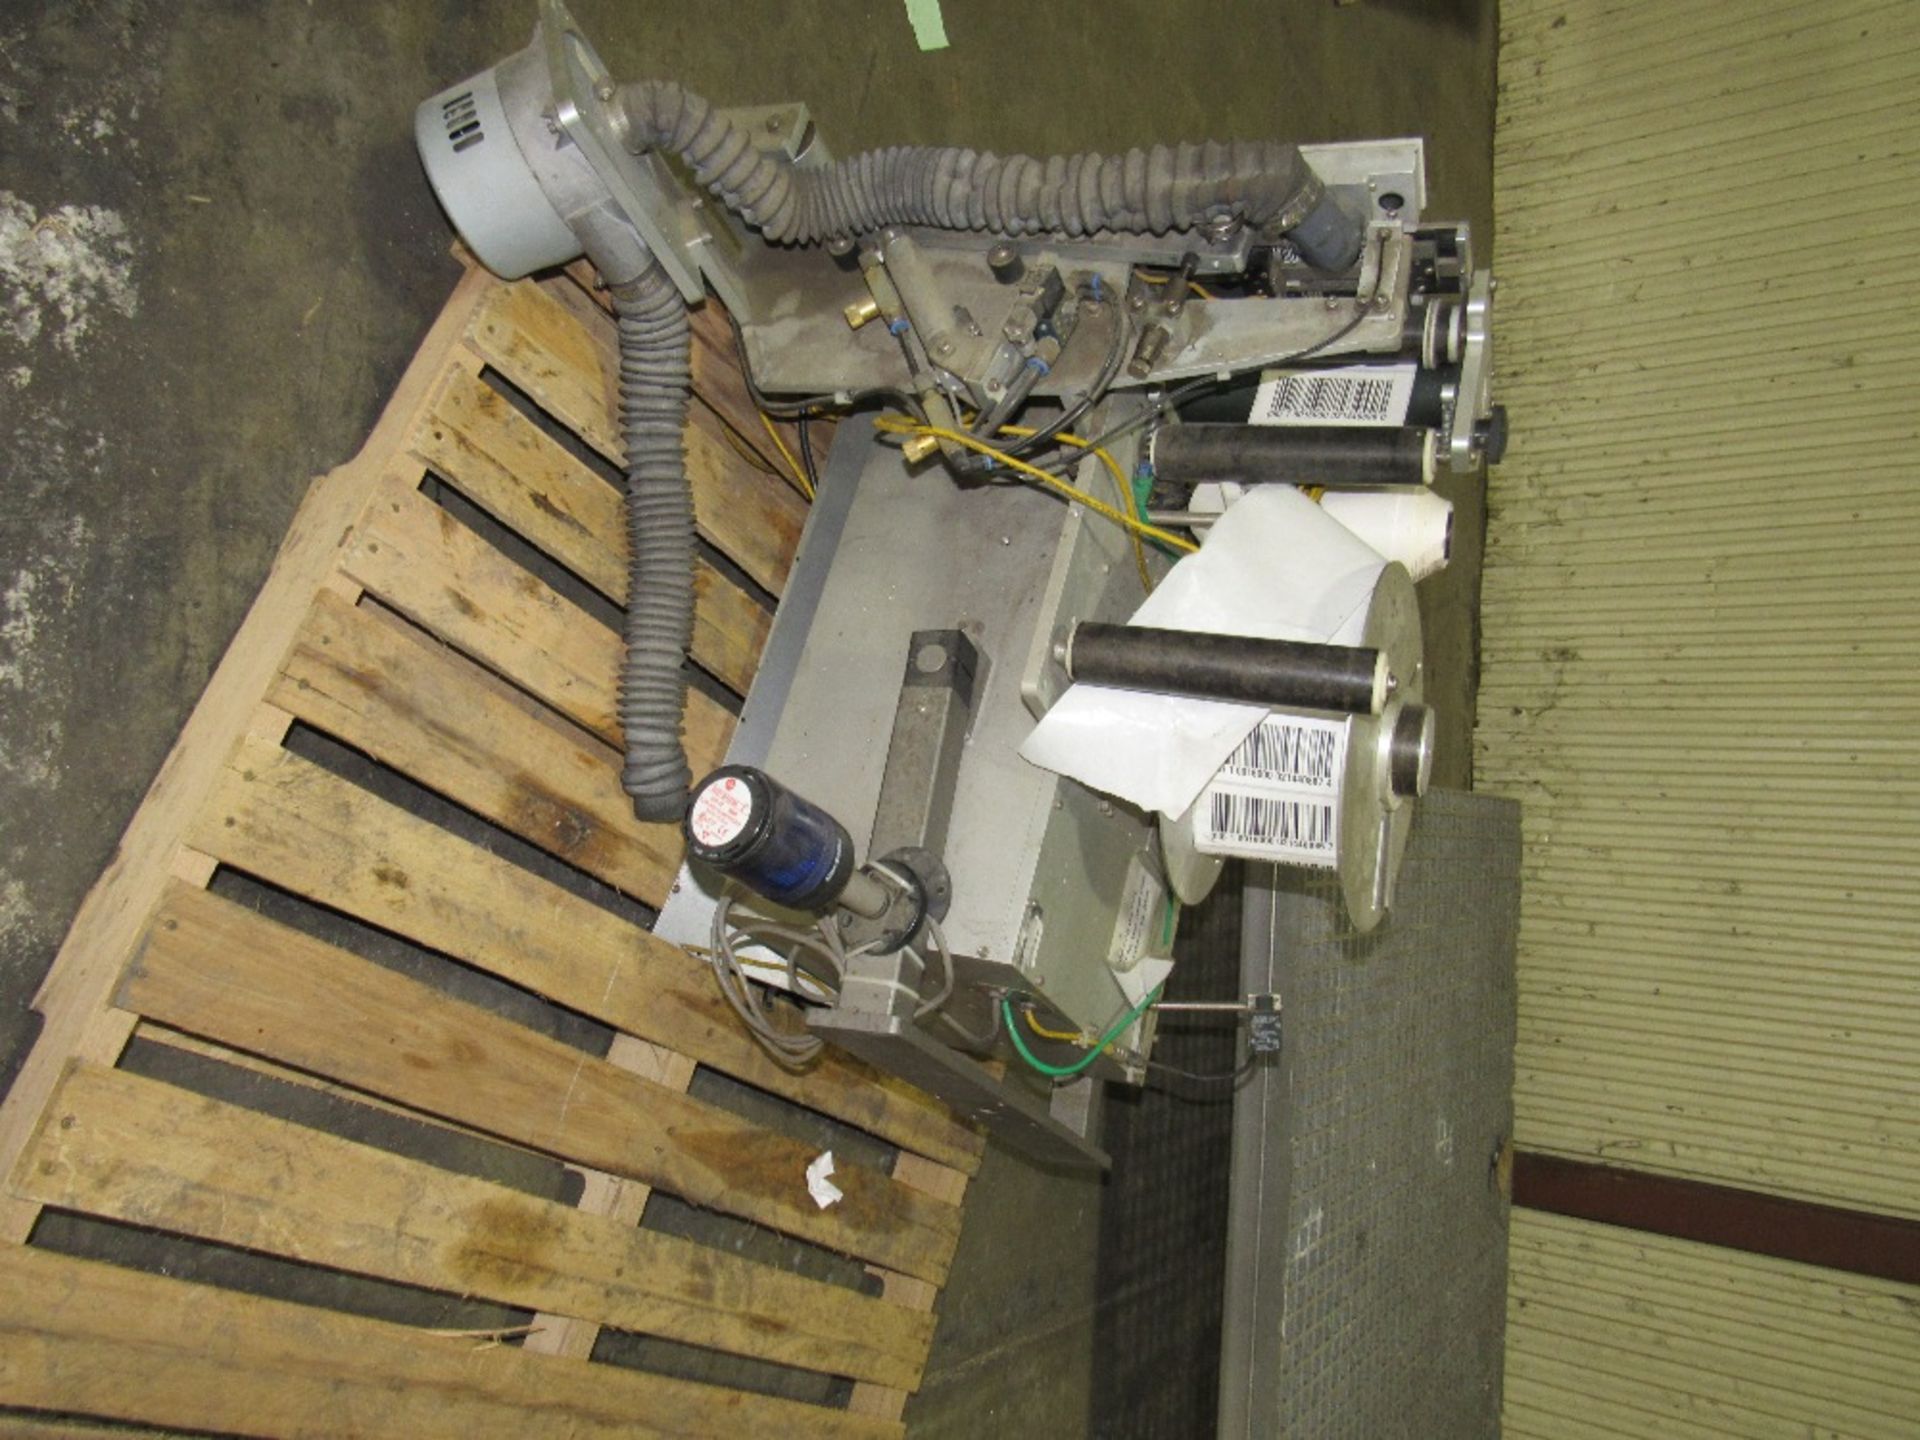 LSI Label Applicator with build in vacuum pump Model 96T0 Serial No. 1023162 designed to apply pre- - Image 6 of 10